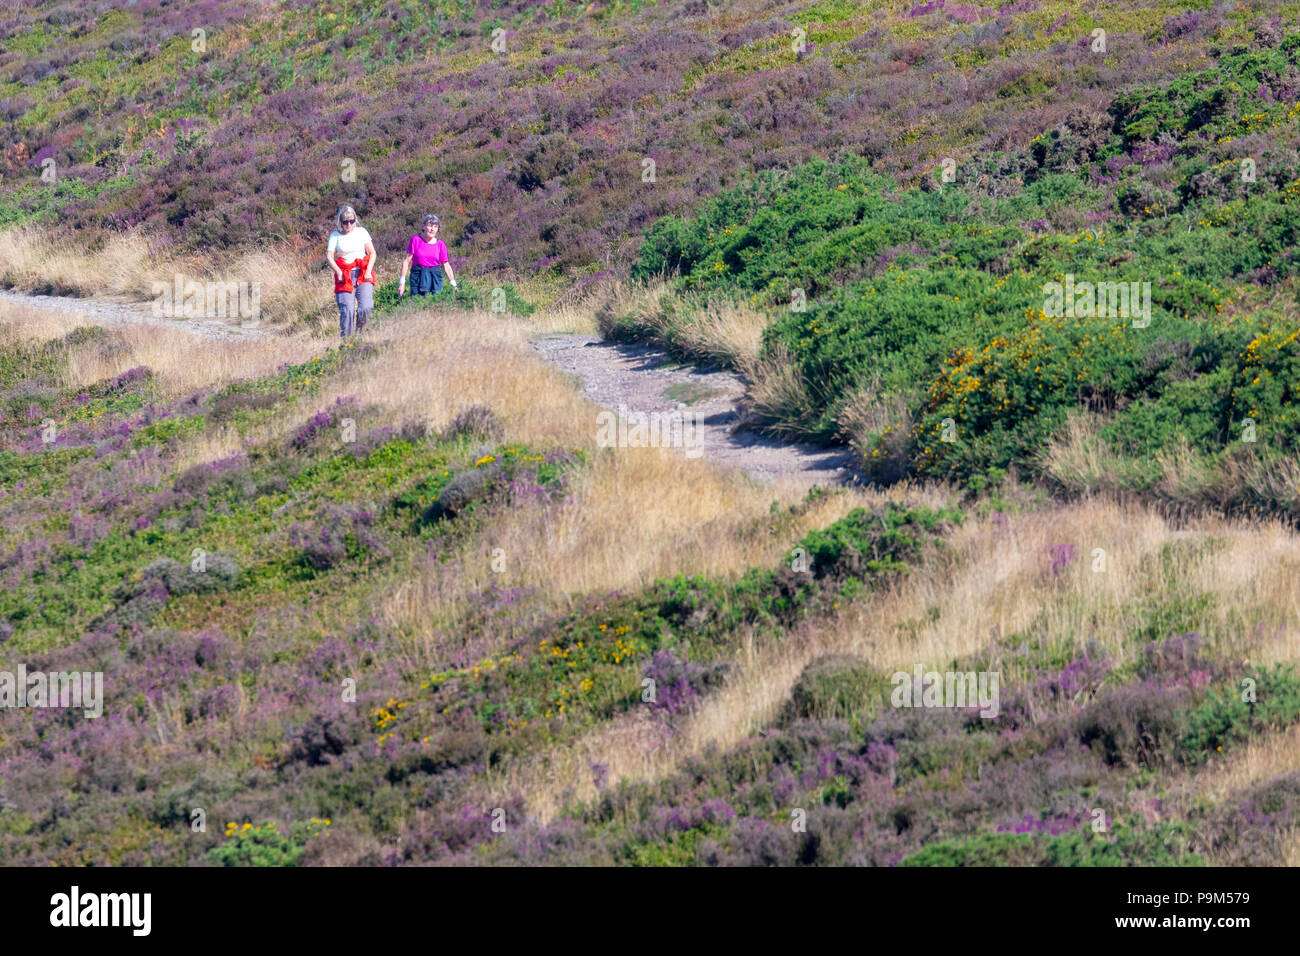 Denbighshire, North Wales, 19th July 2018, UK Weather:  Another hot day ahead with the drought continuing for the next to weeks as parched land expands across many parts of the UK. A couple of ladies walking along the Offa's Dyke Path from Moel Famau as the heather tries to flower during the drought conditions with extreme fire risk over the entire Clwydian Range, Denbighshire, Wales Credit: DGDImages/Alamy Live News Stock Photo